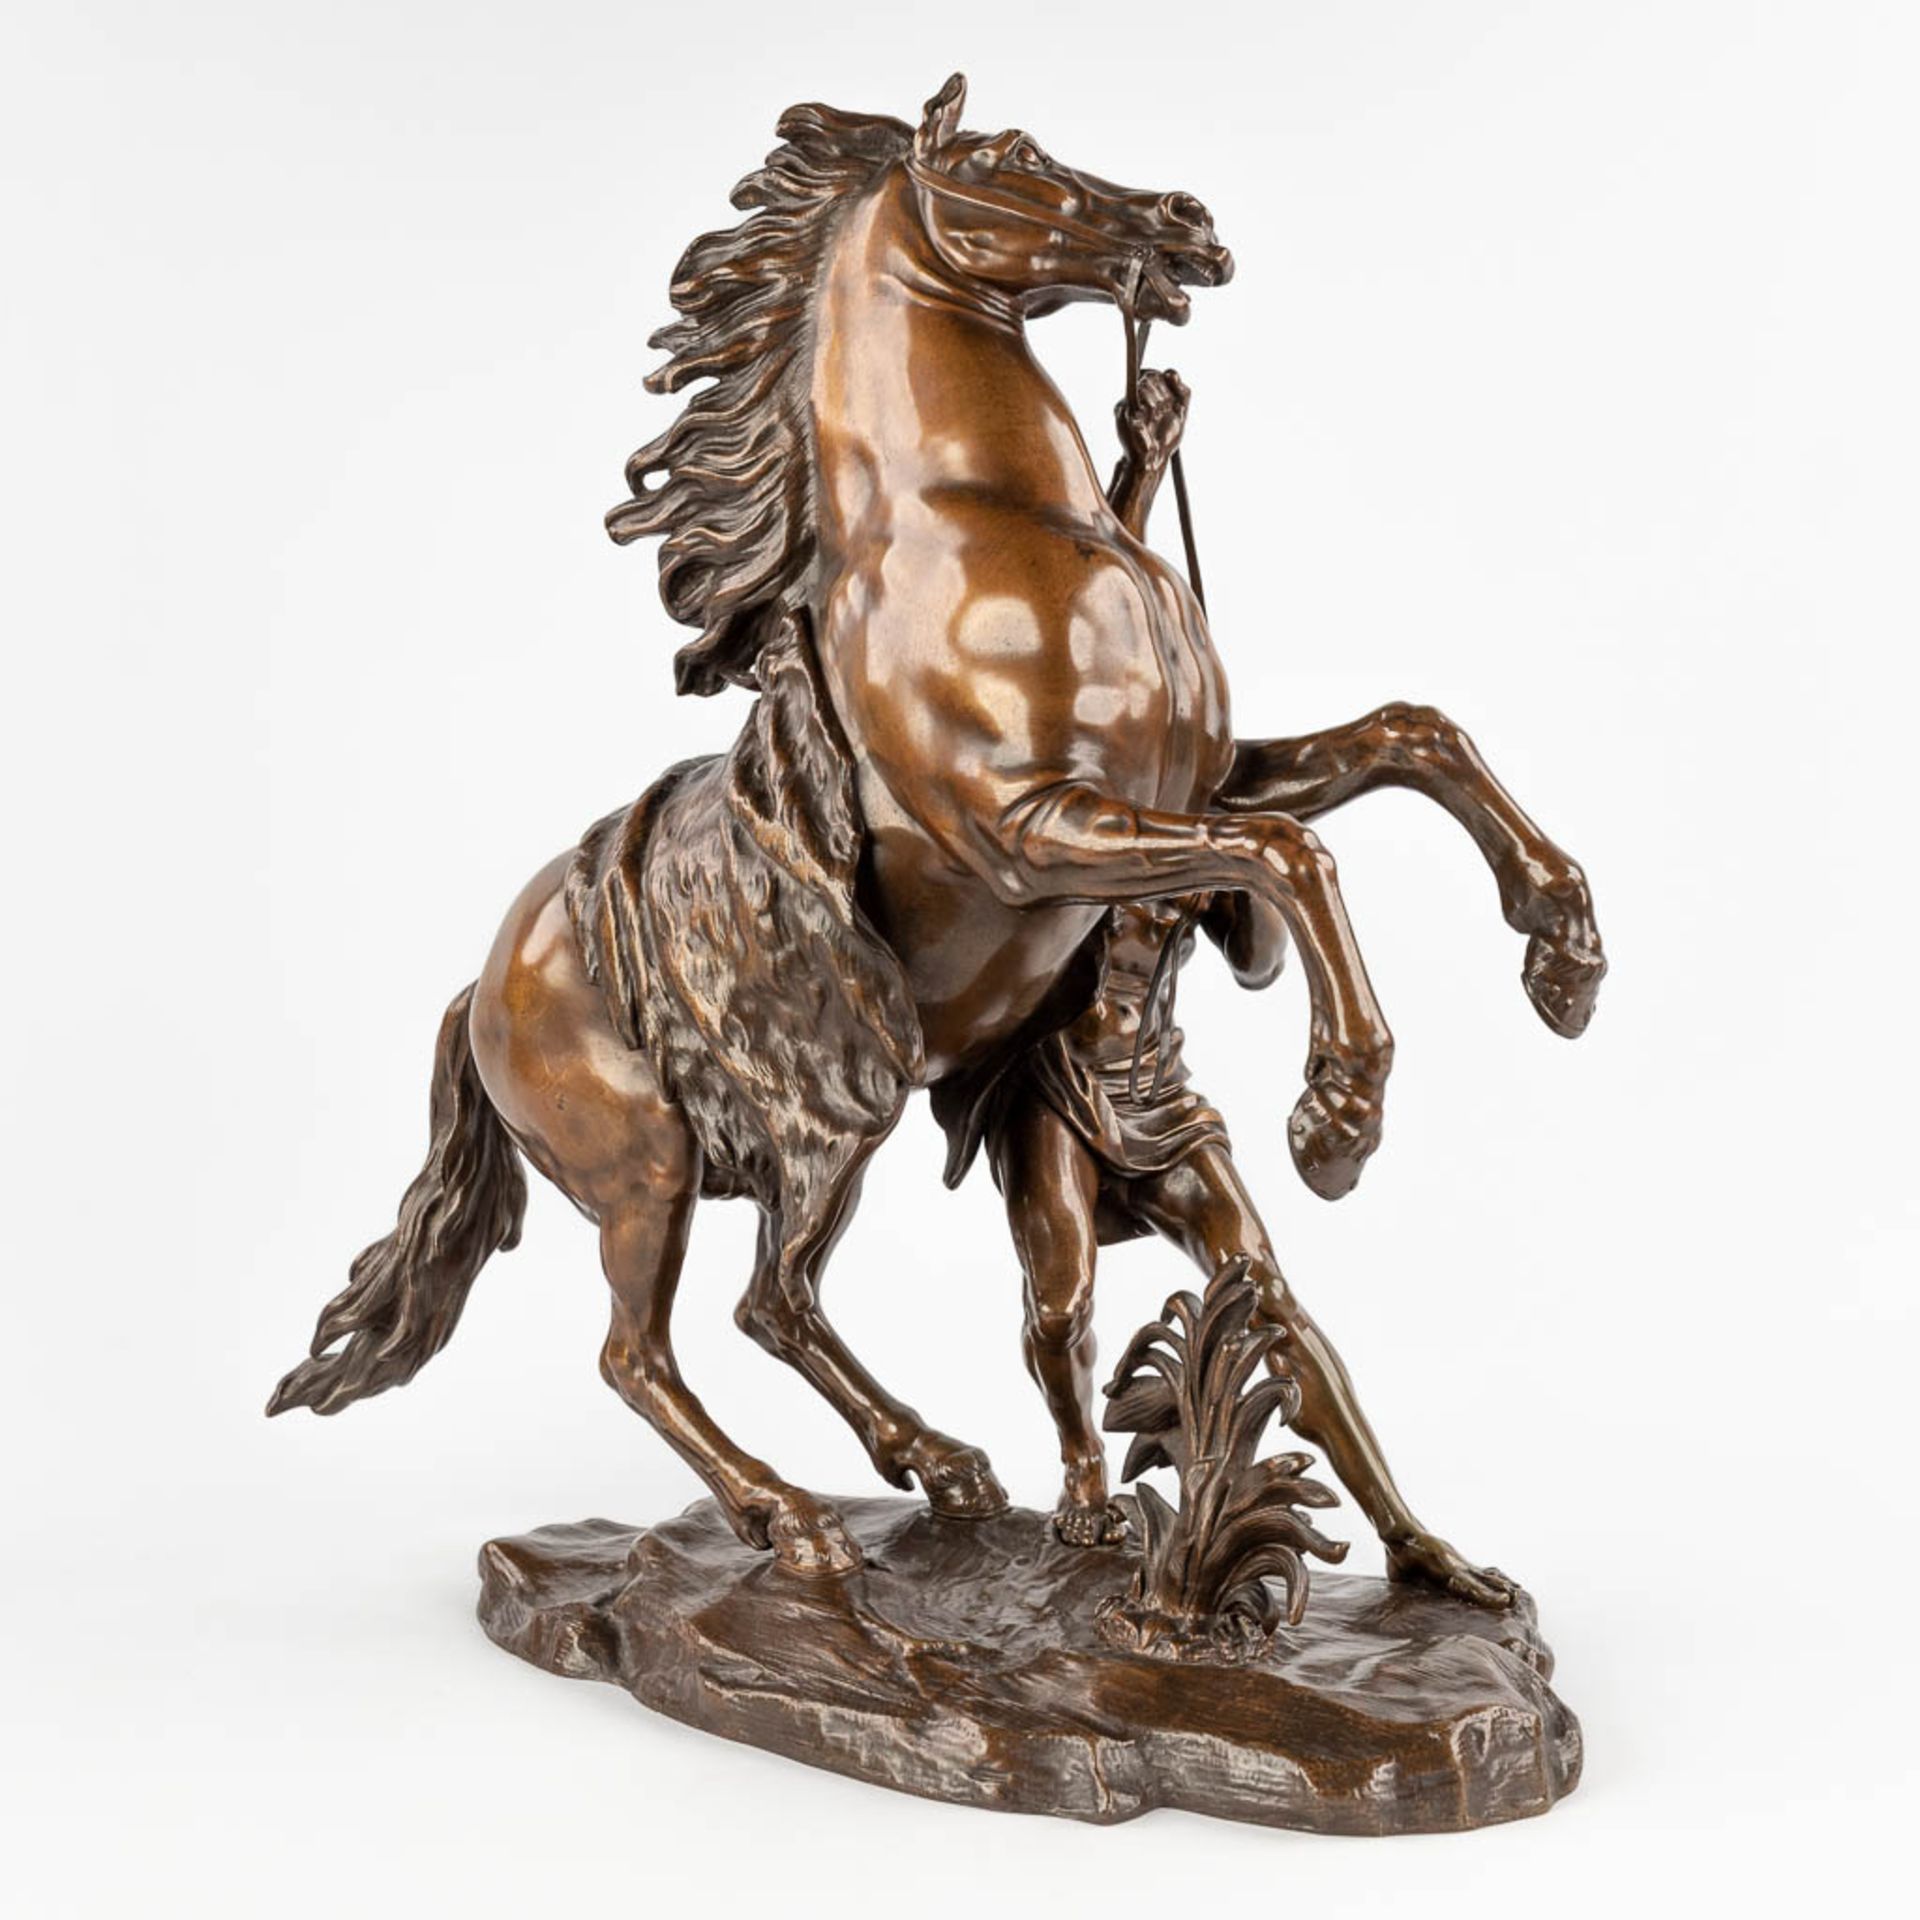 Guillaume I COUSTOU (1677-1746)(after), 'Marly horse' patinated bronze. (D:26 x W:56 x H:58 cm) - Image 5 of 12